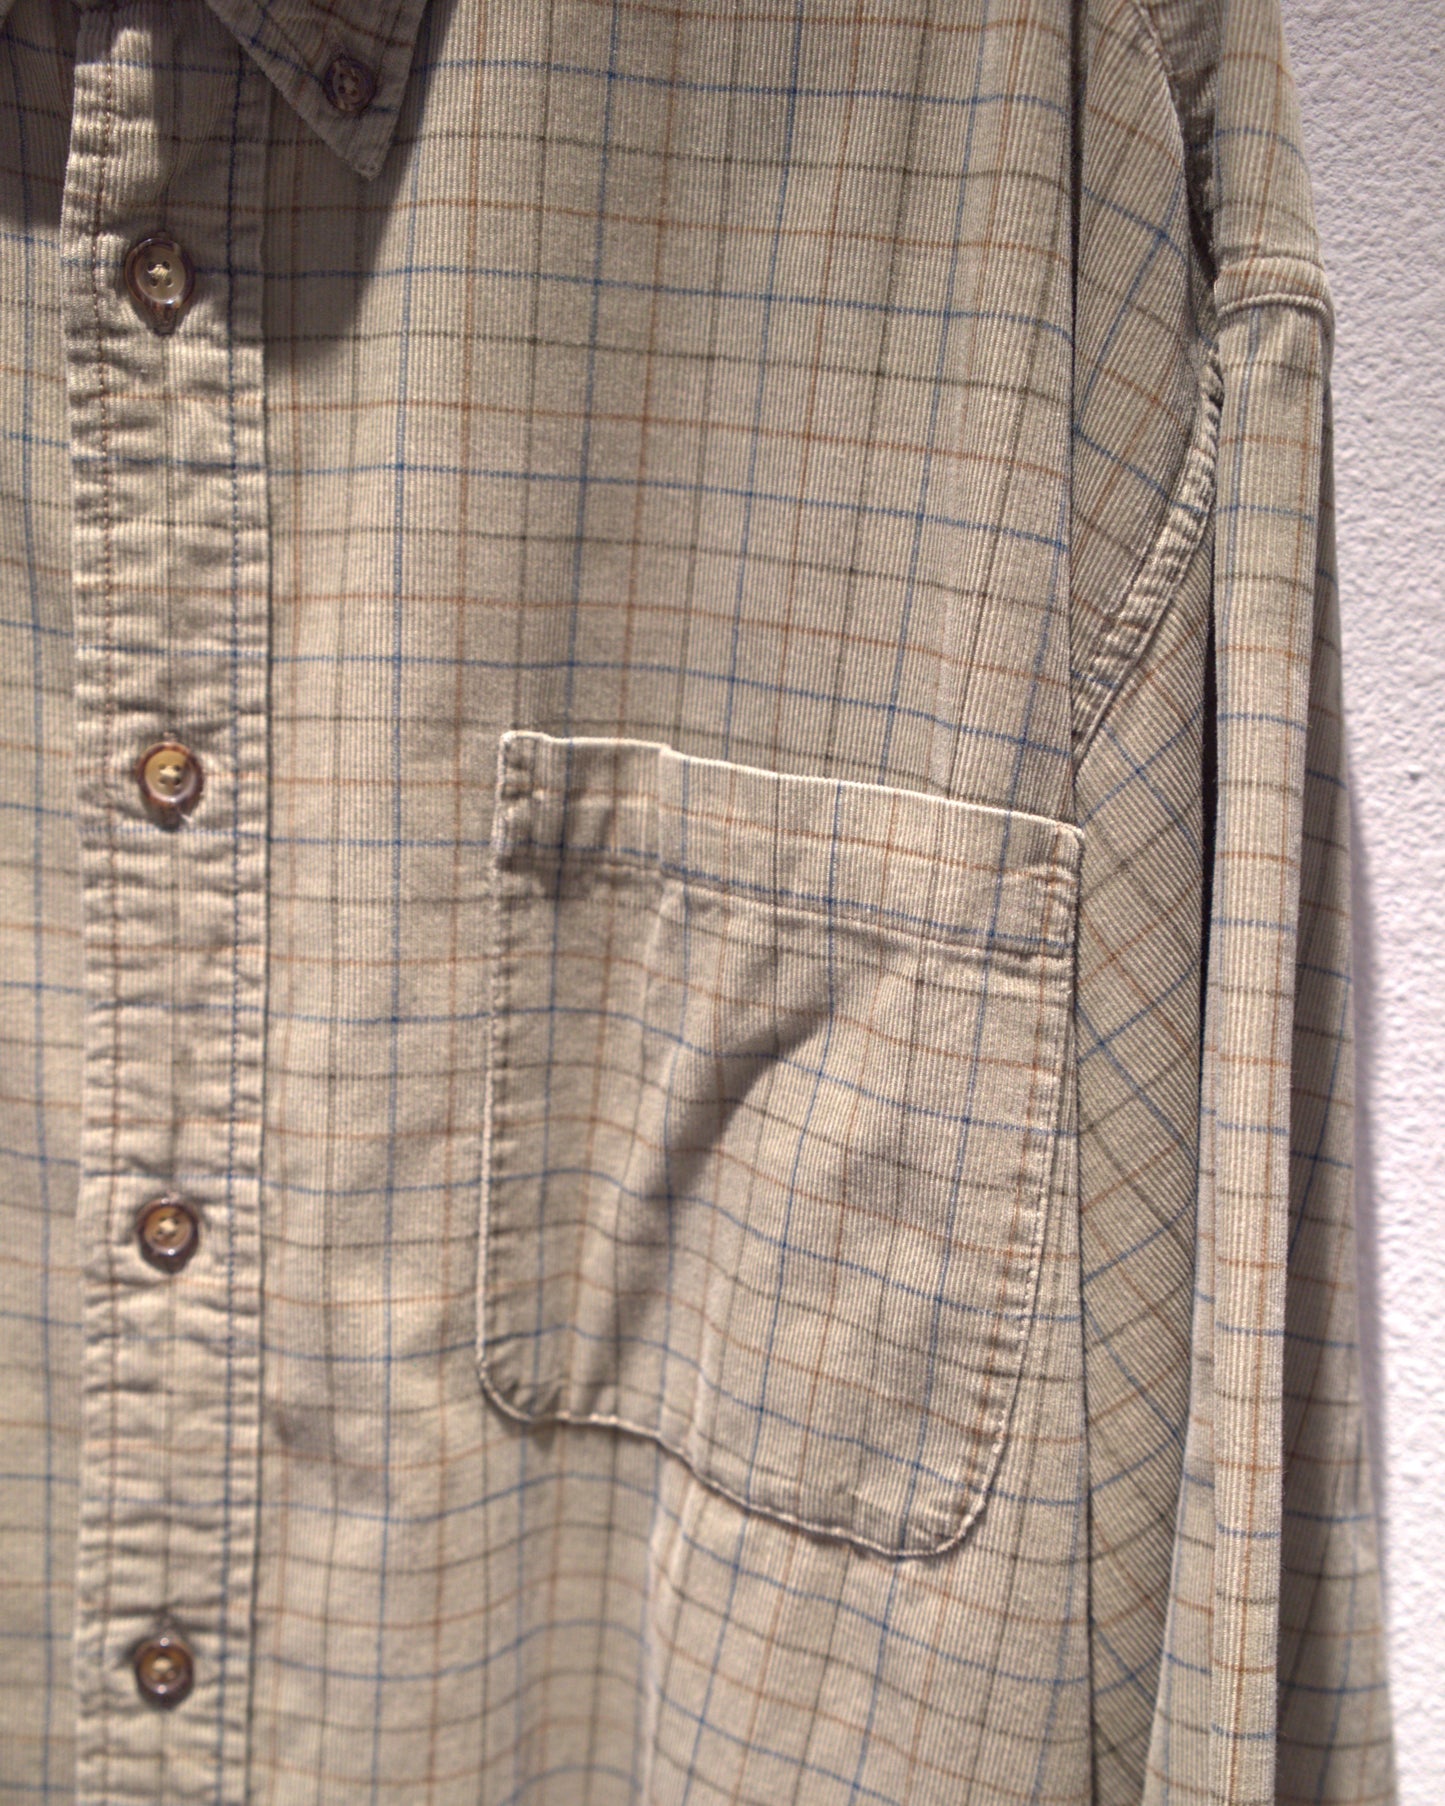 90's-00's Checked corduroy button-down shirt